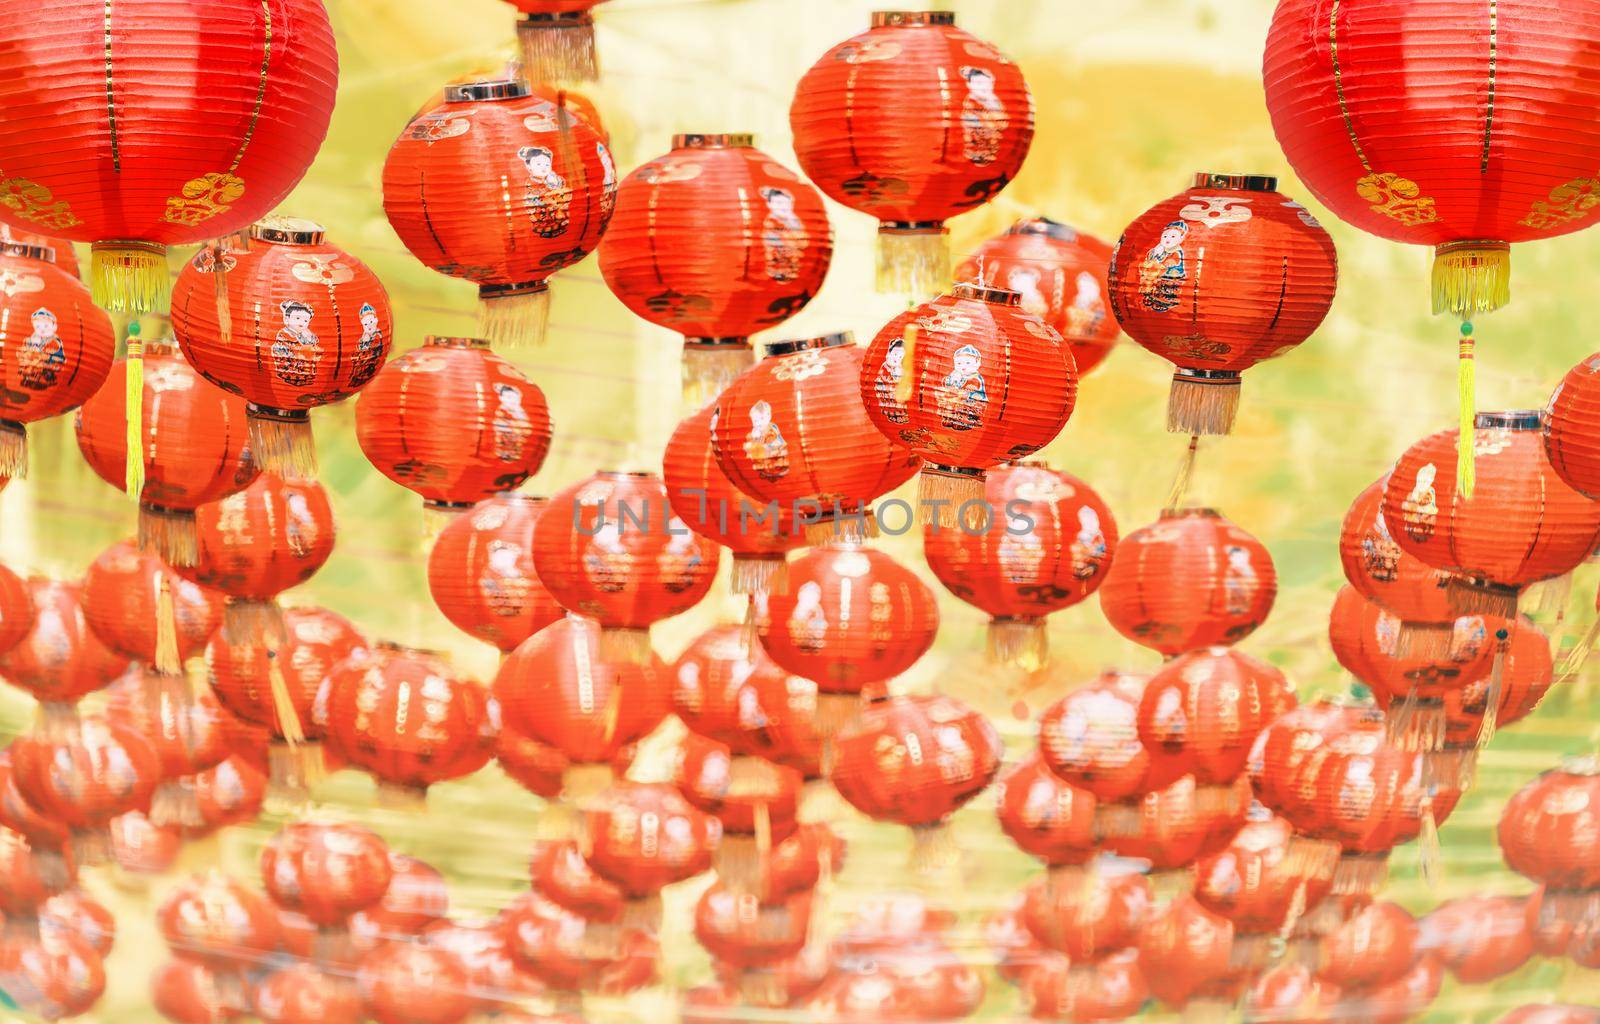 Lanterns in Chinese new year day festival.